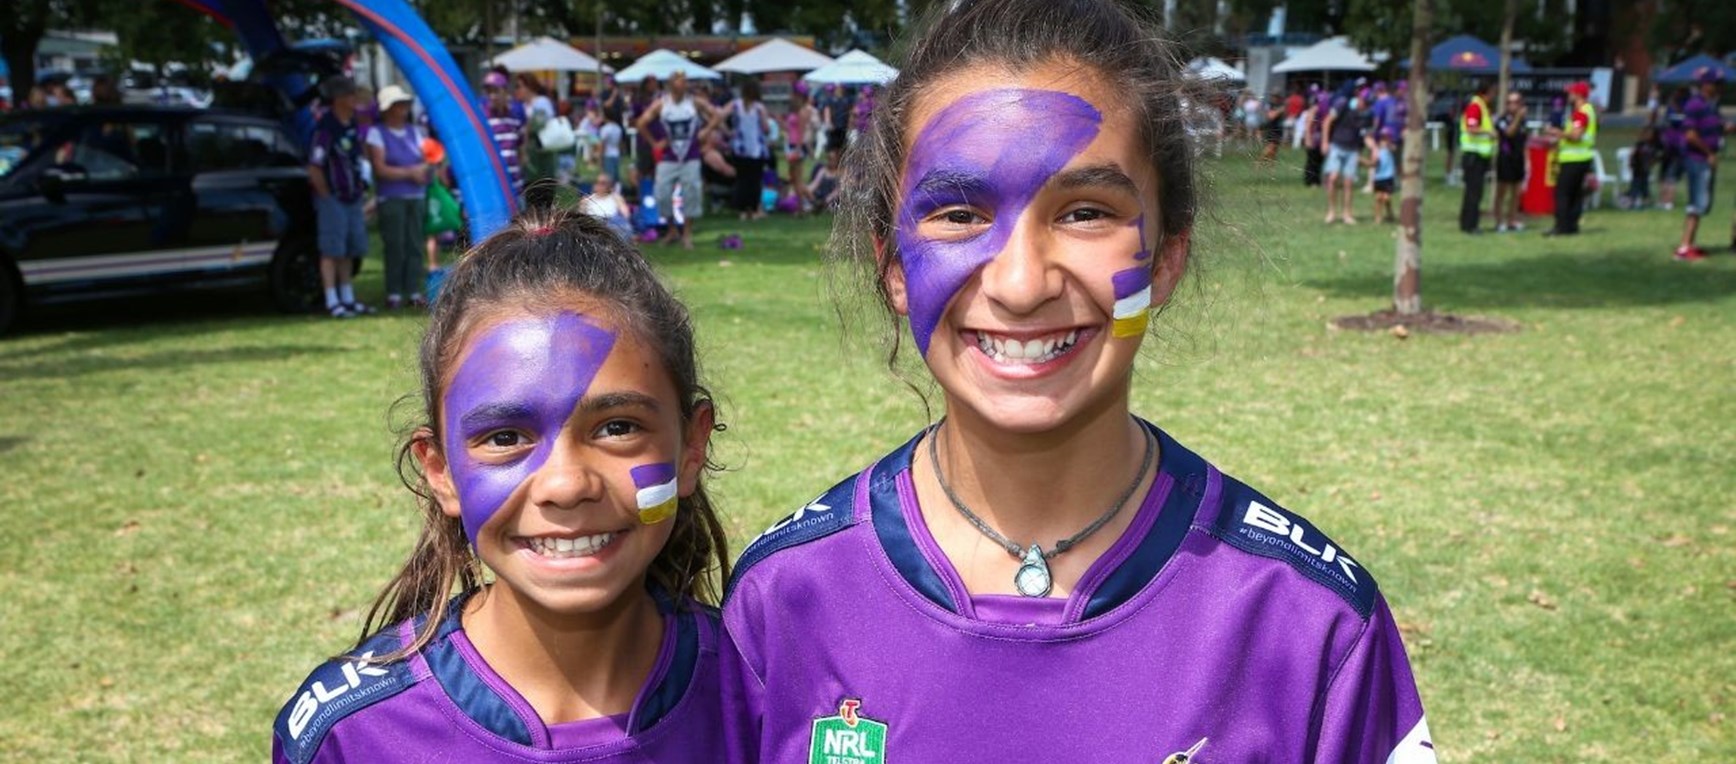 In pictures: 2015 Family Day